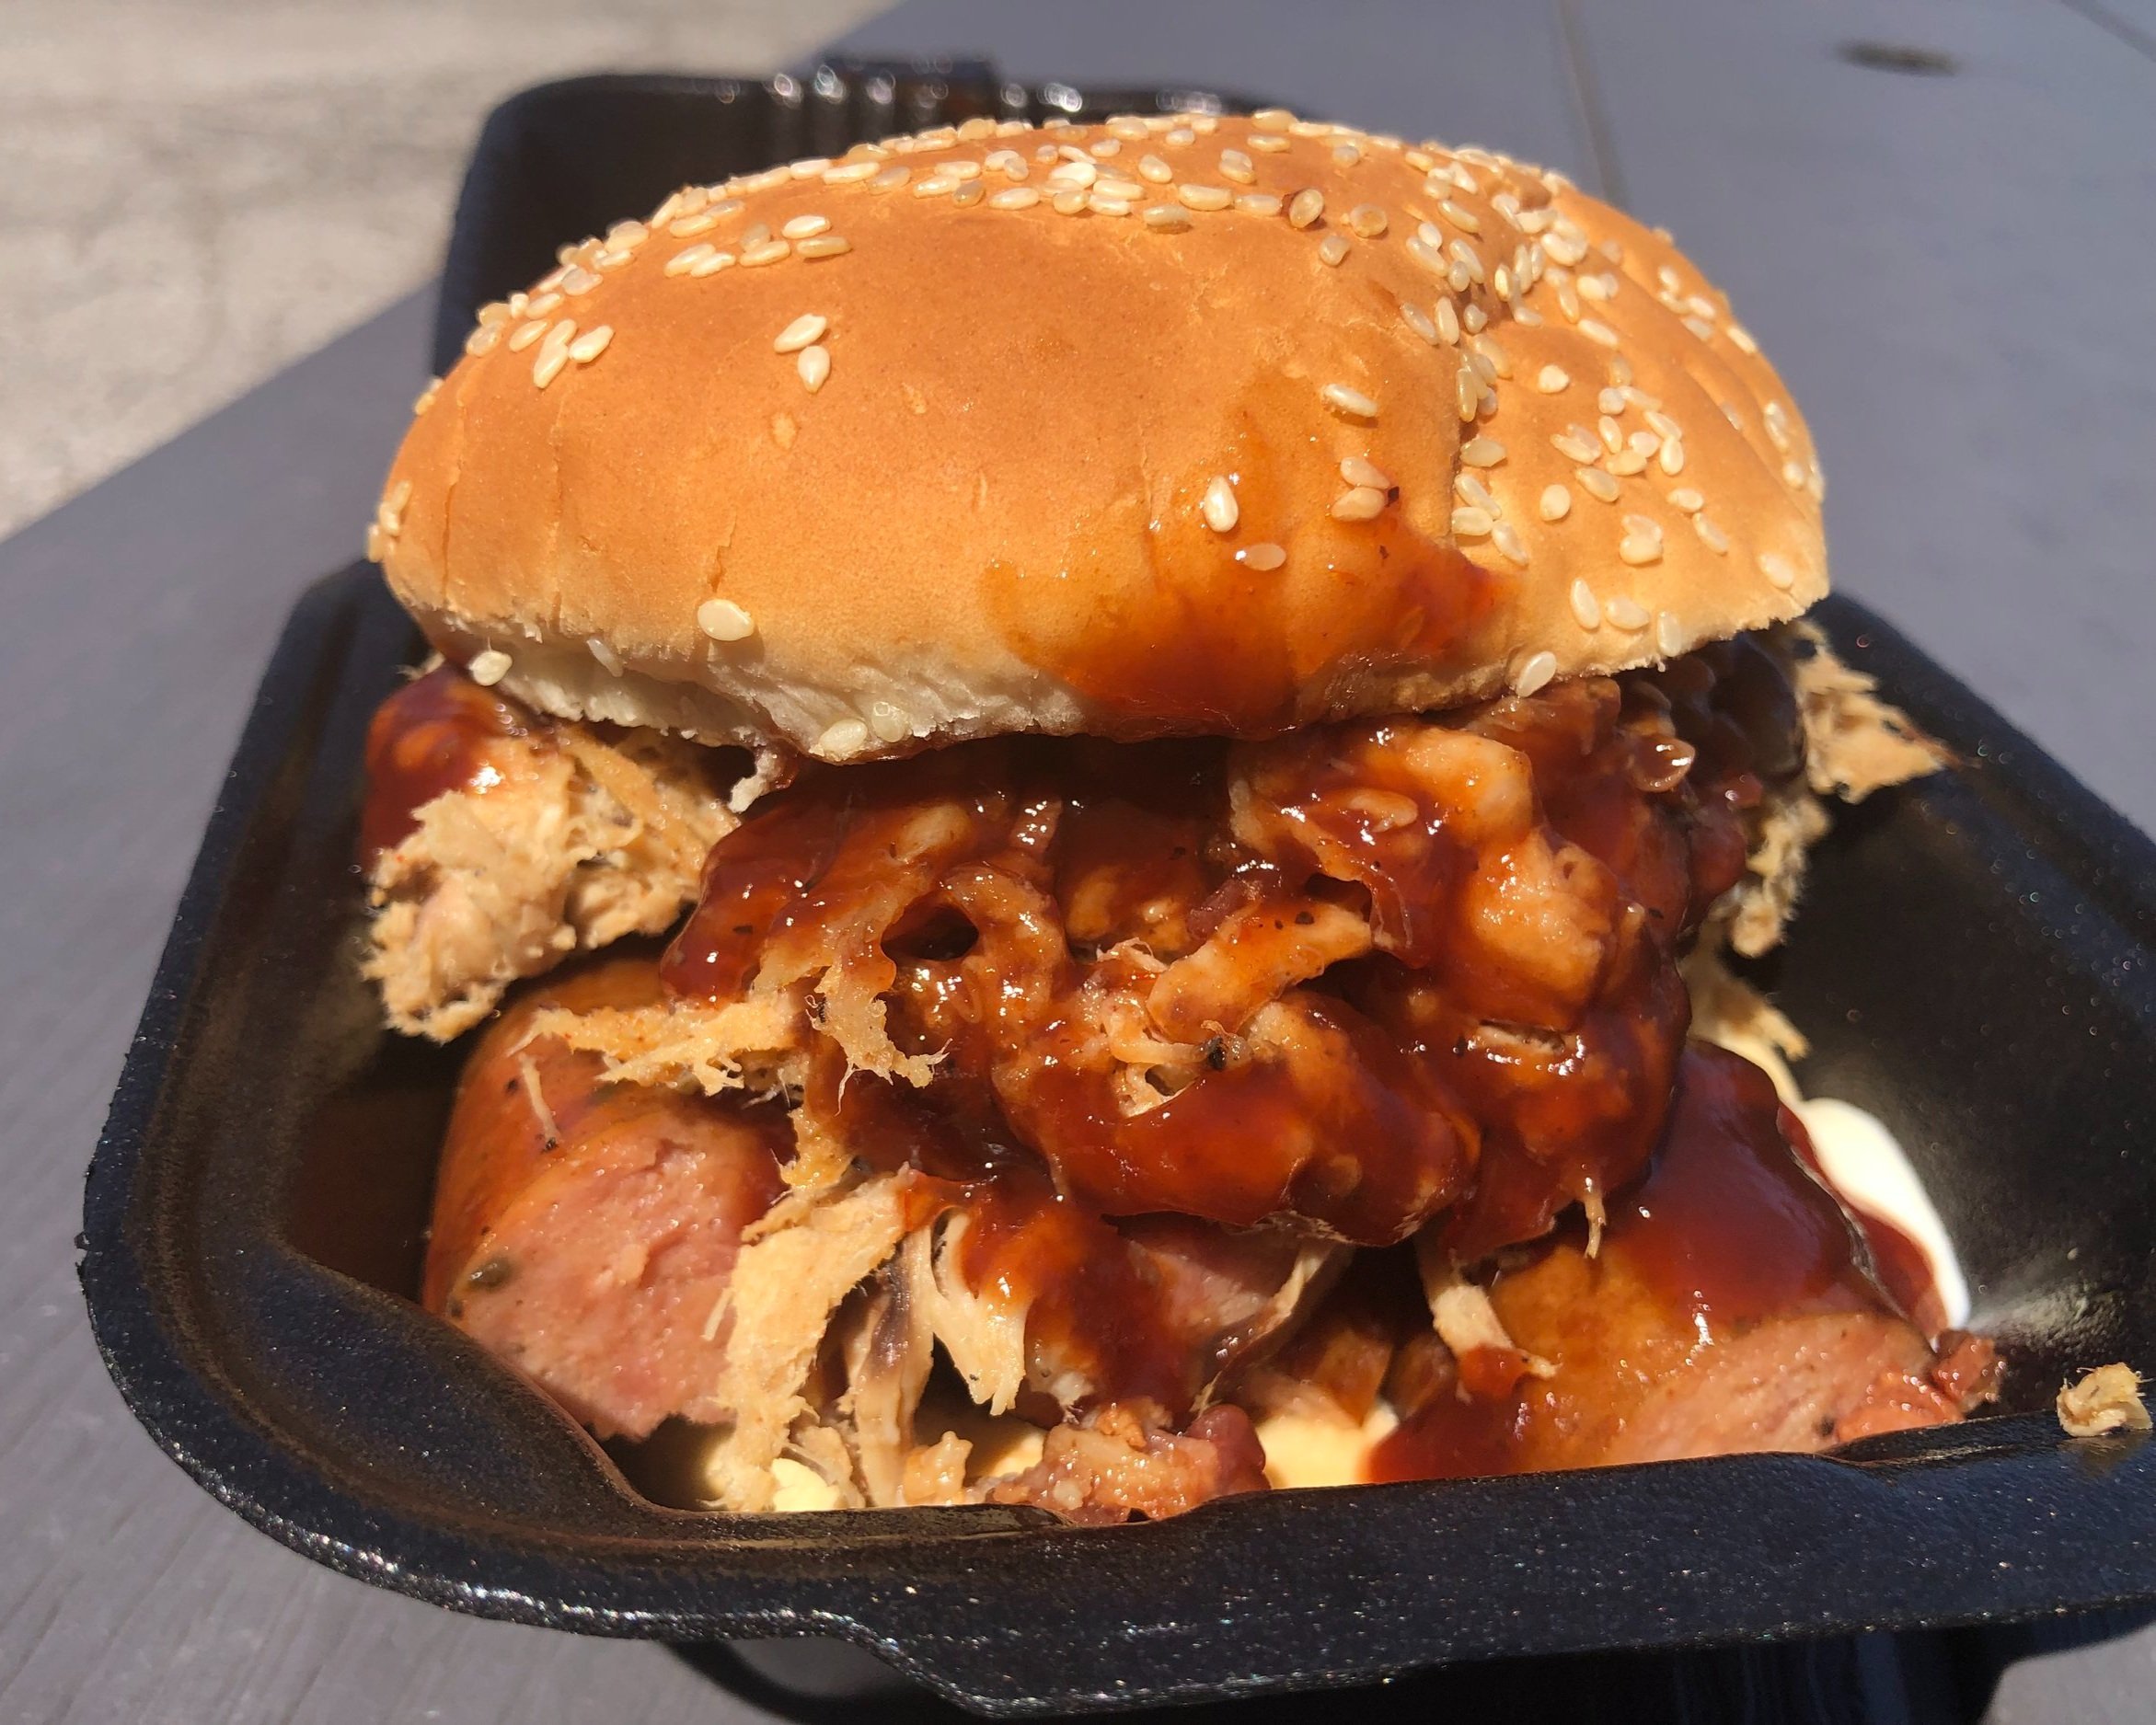 Paul Rudd Loves This Kansas City Barbecue Sandwich So Much, He